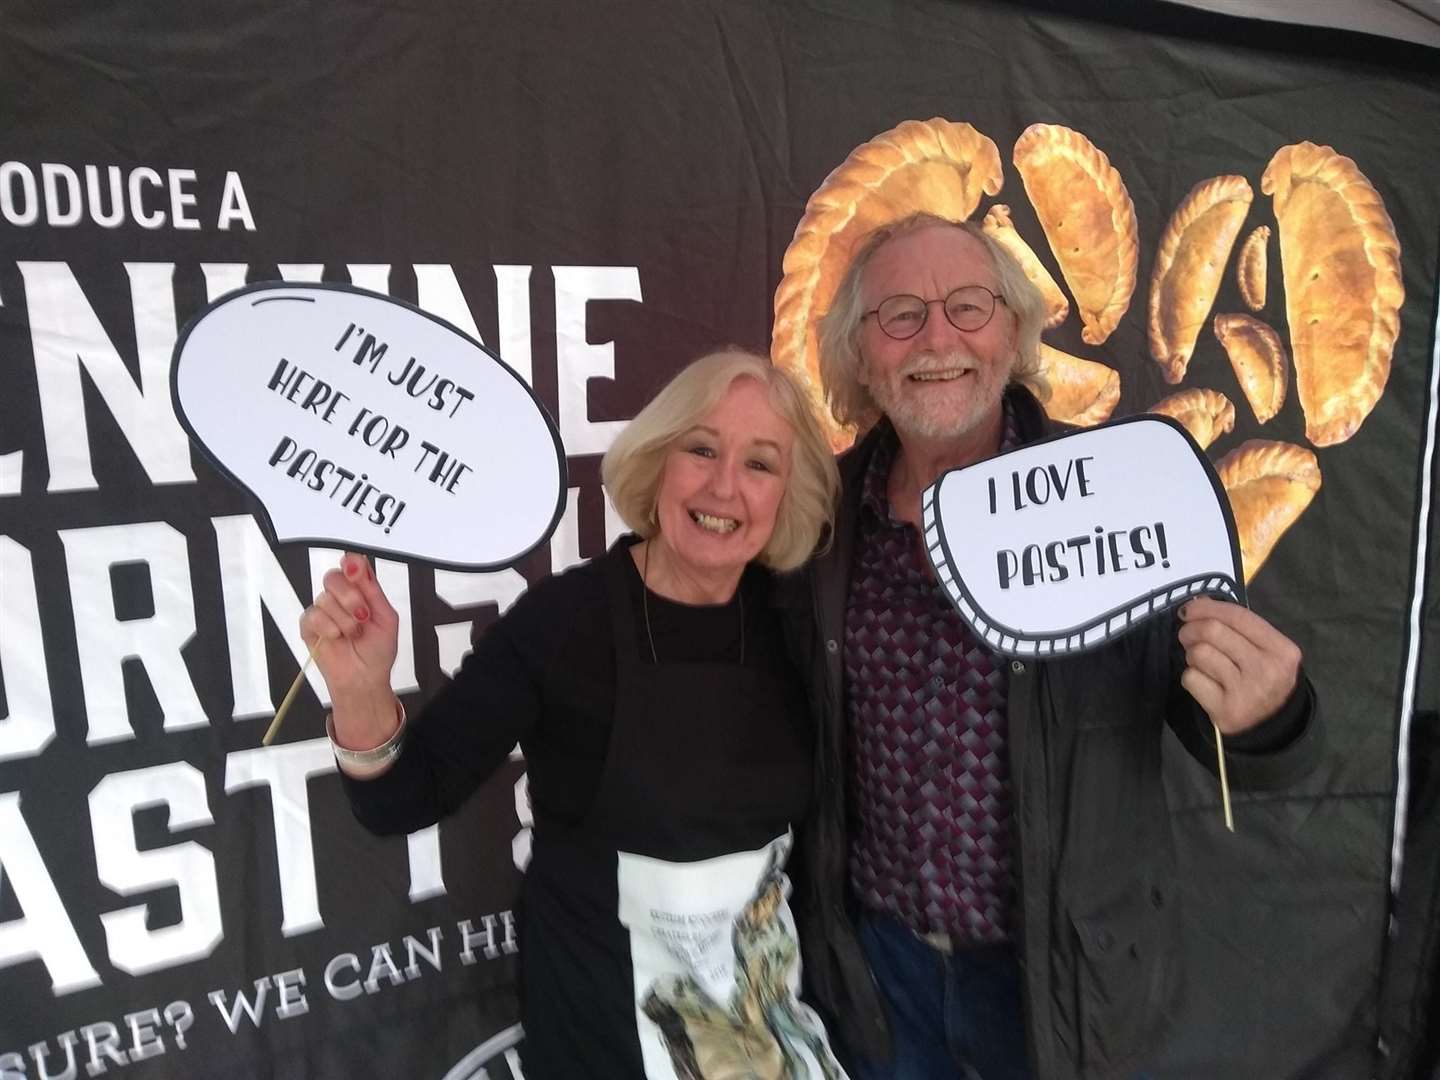 Jill Martin and husband Geoff had pasties stolen this morning